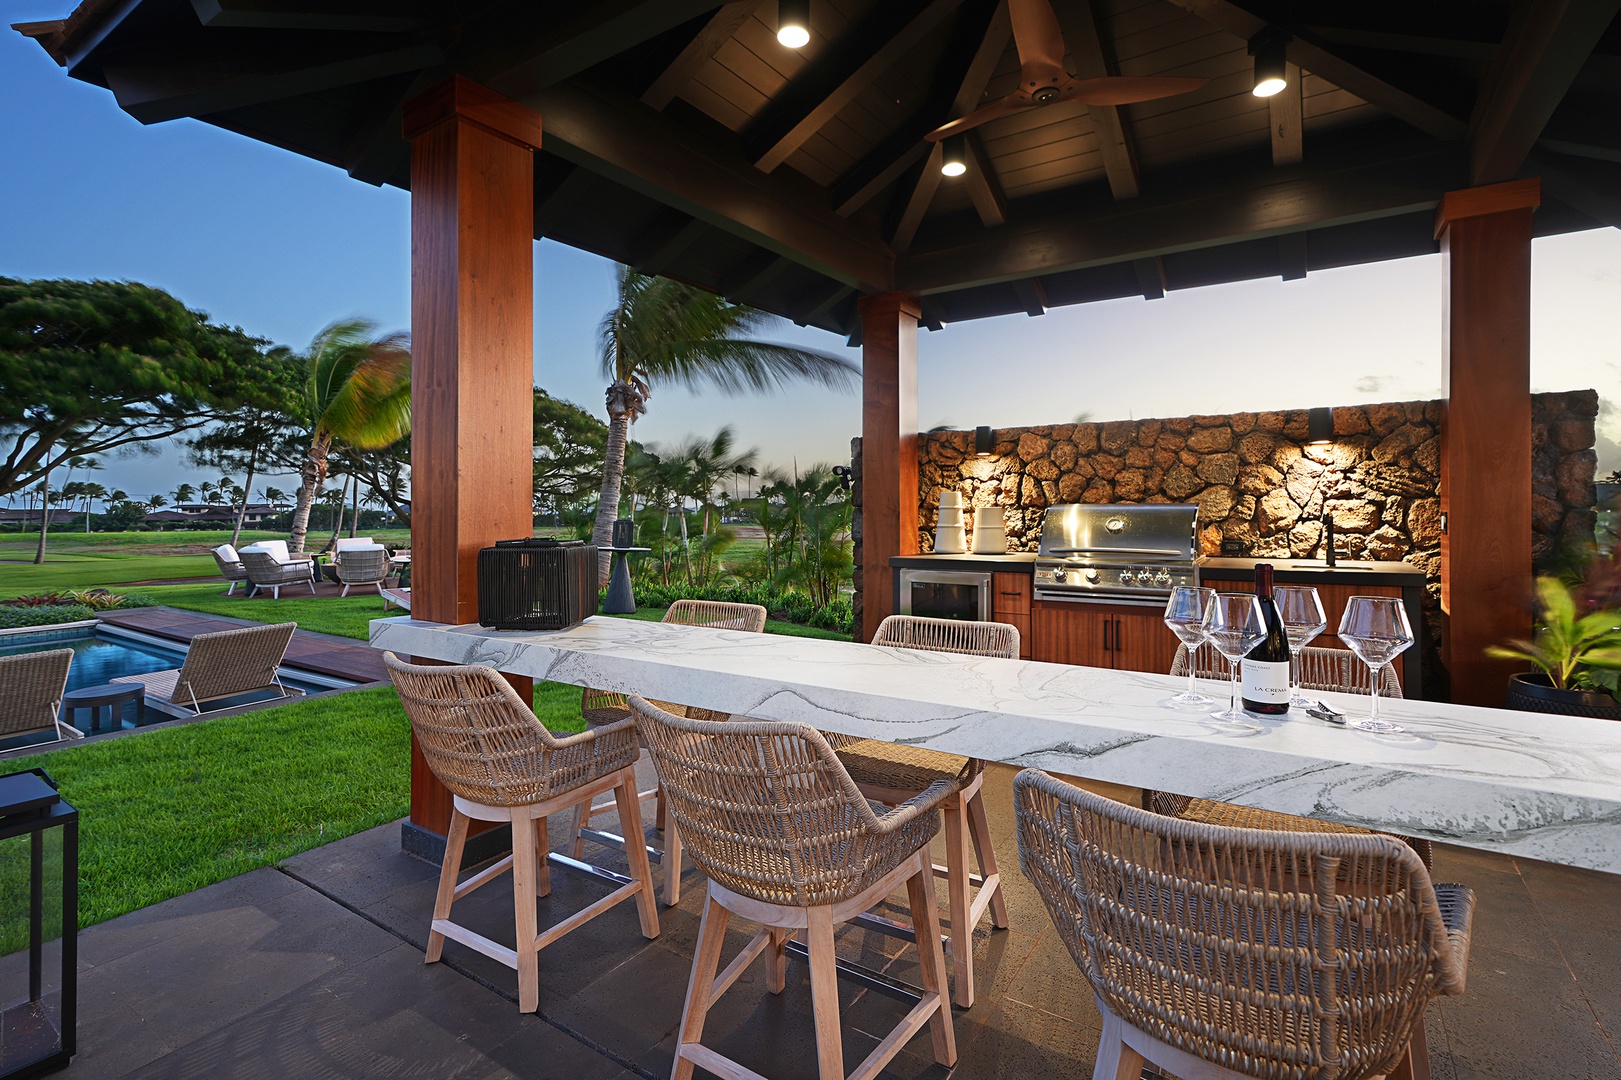 Koloa Vacation Rentals, Hale Pakika at Kukui'ula - Grab a seat the tropical poolside bar and grill setup for your end of day recap.